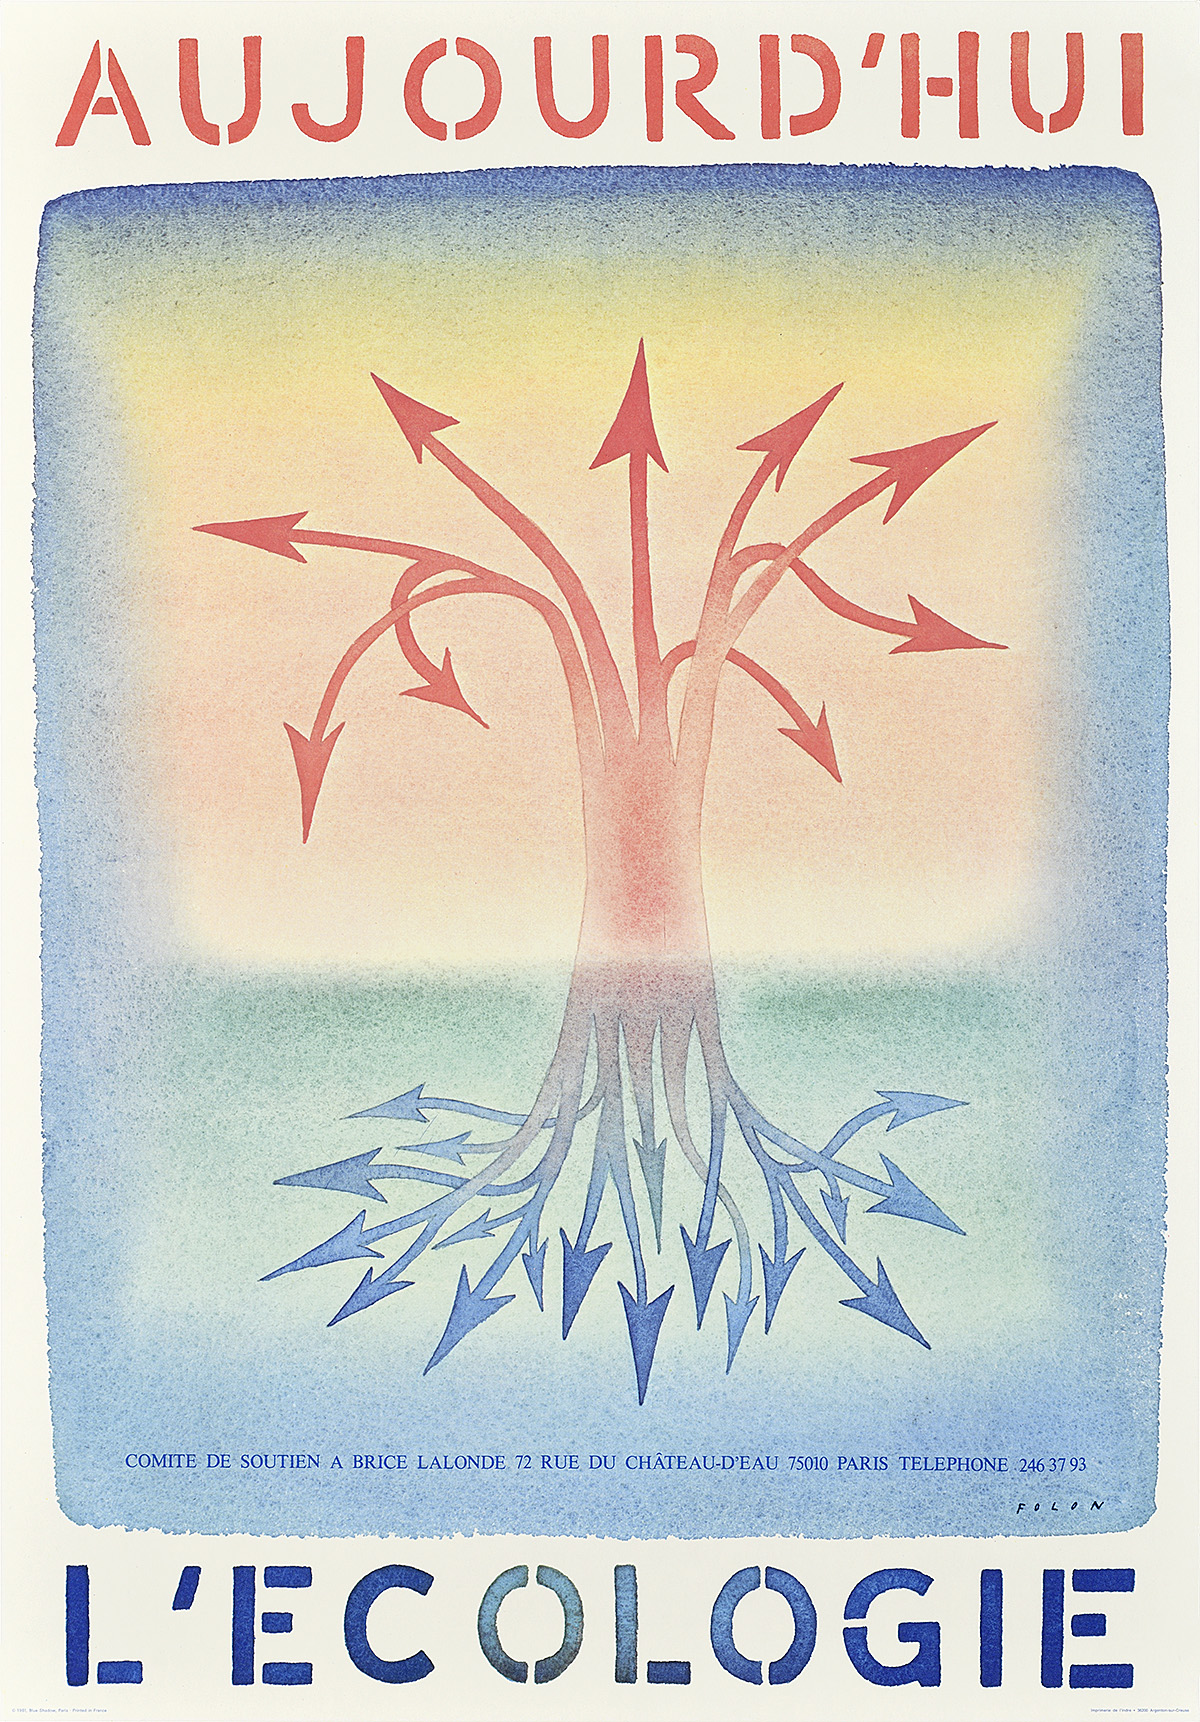 A poster of a tree with arrows on its leaves and roots. The top half is in red, the bottom in blue.